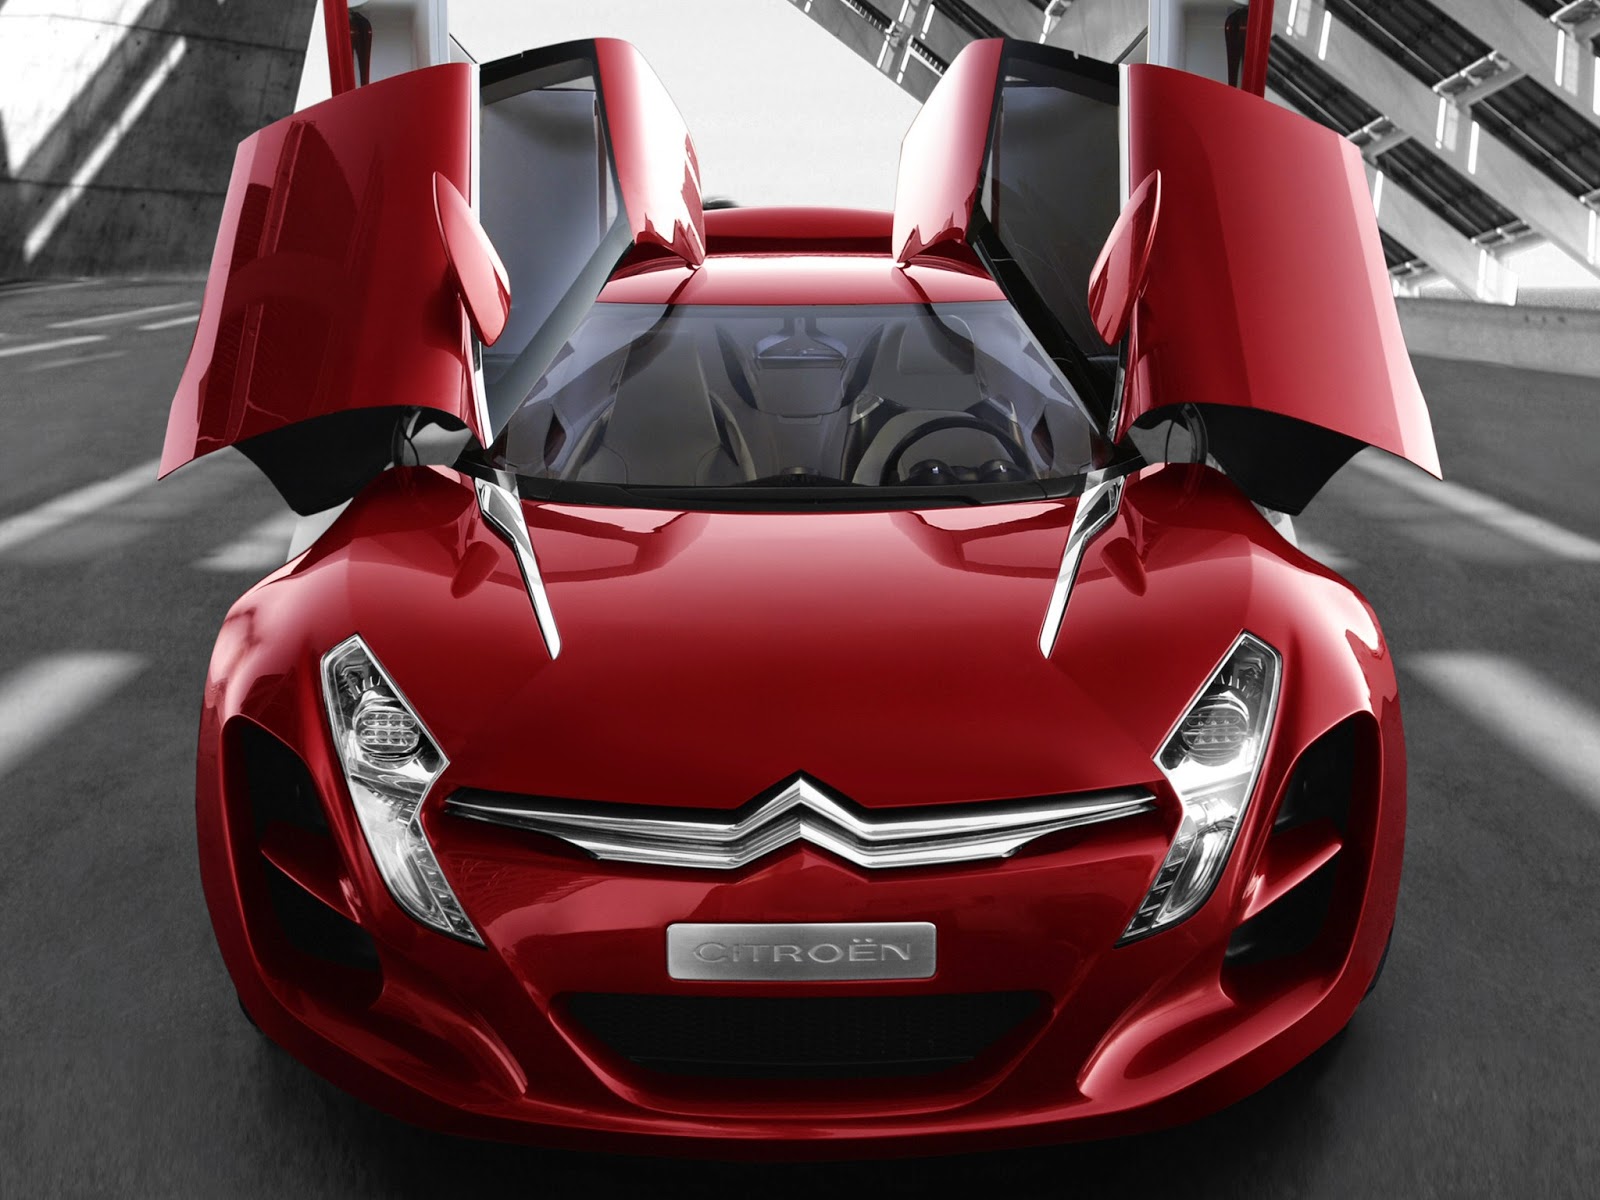 10 Very Cool Full HD Car Wallpapers You will fall in love ...